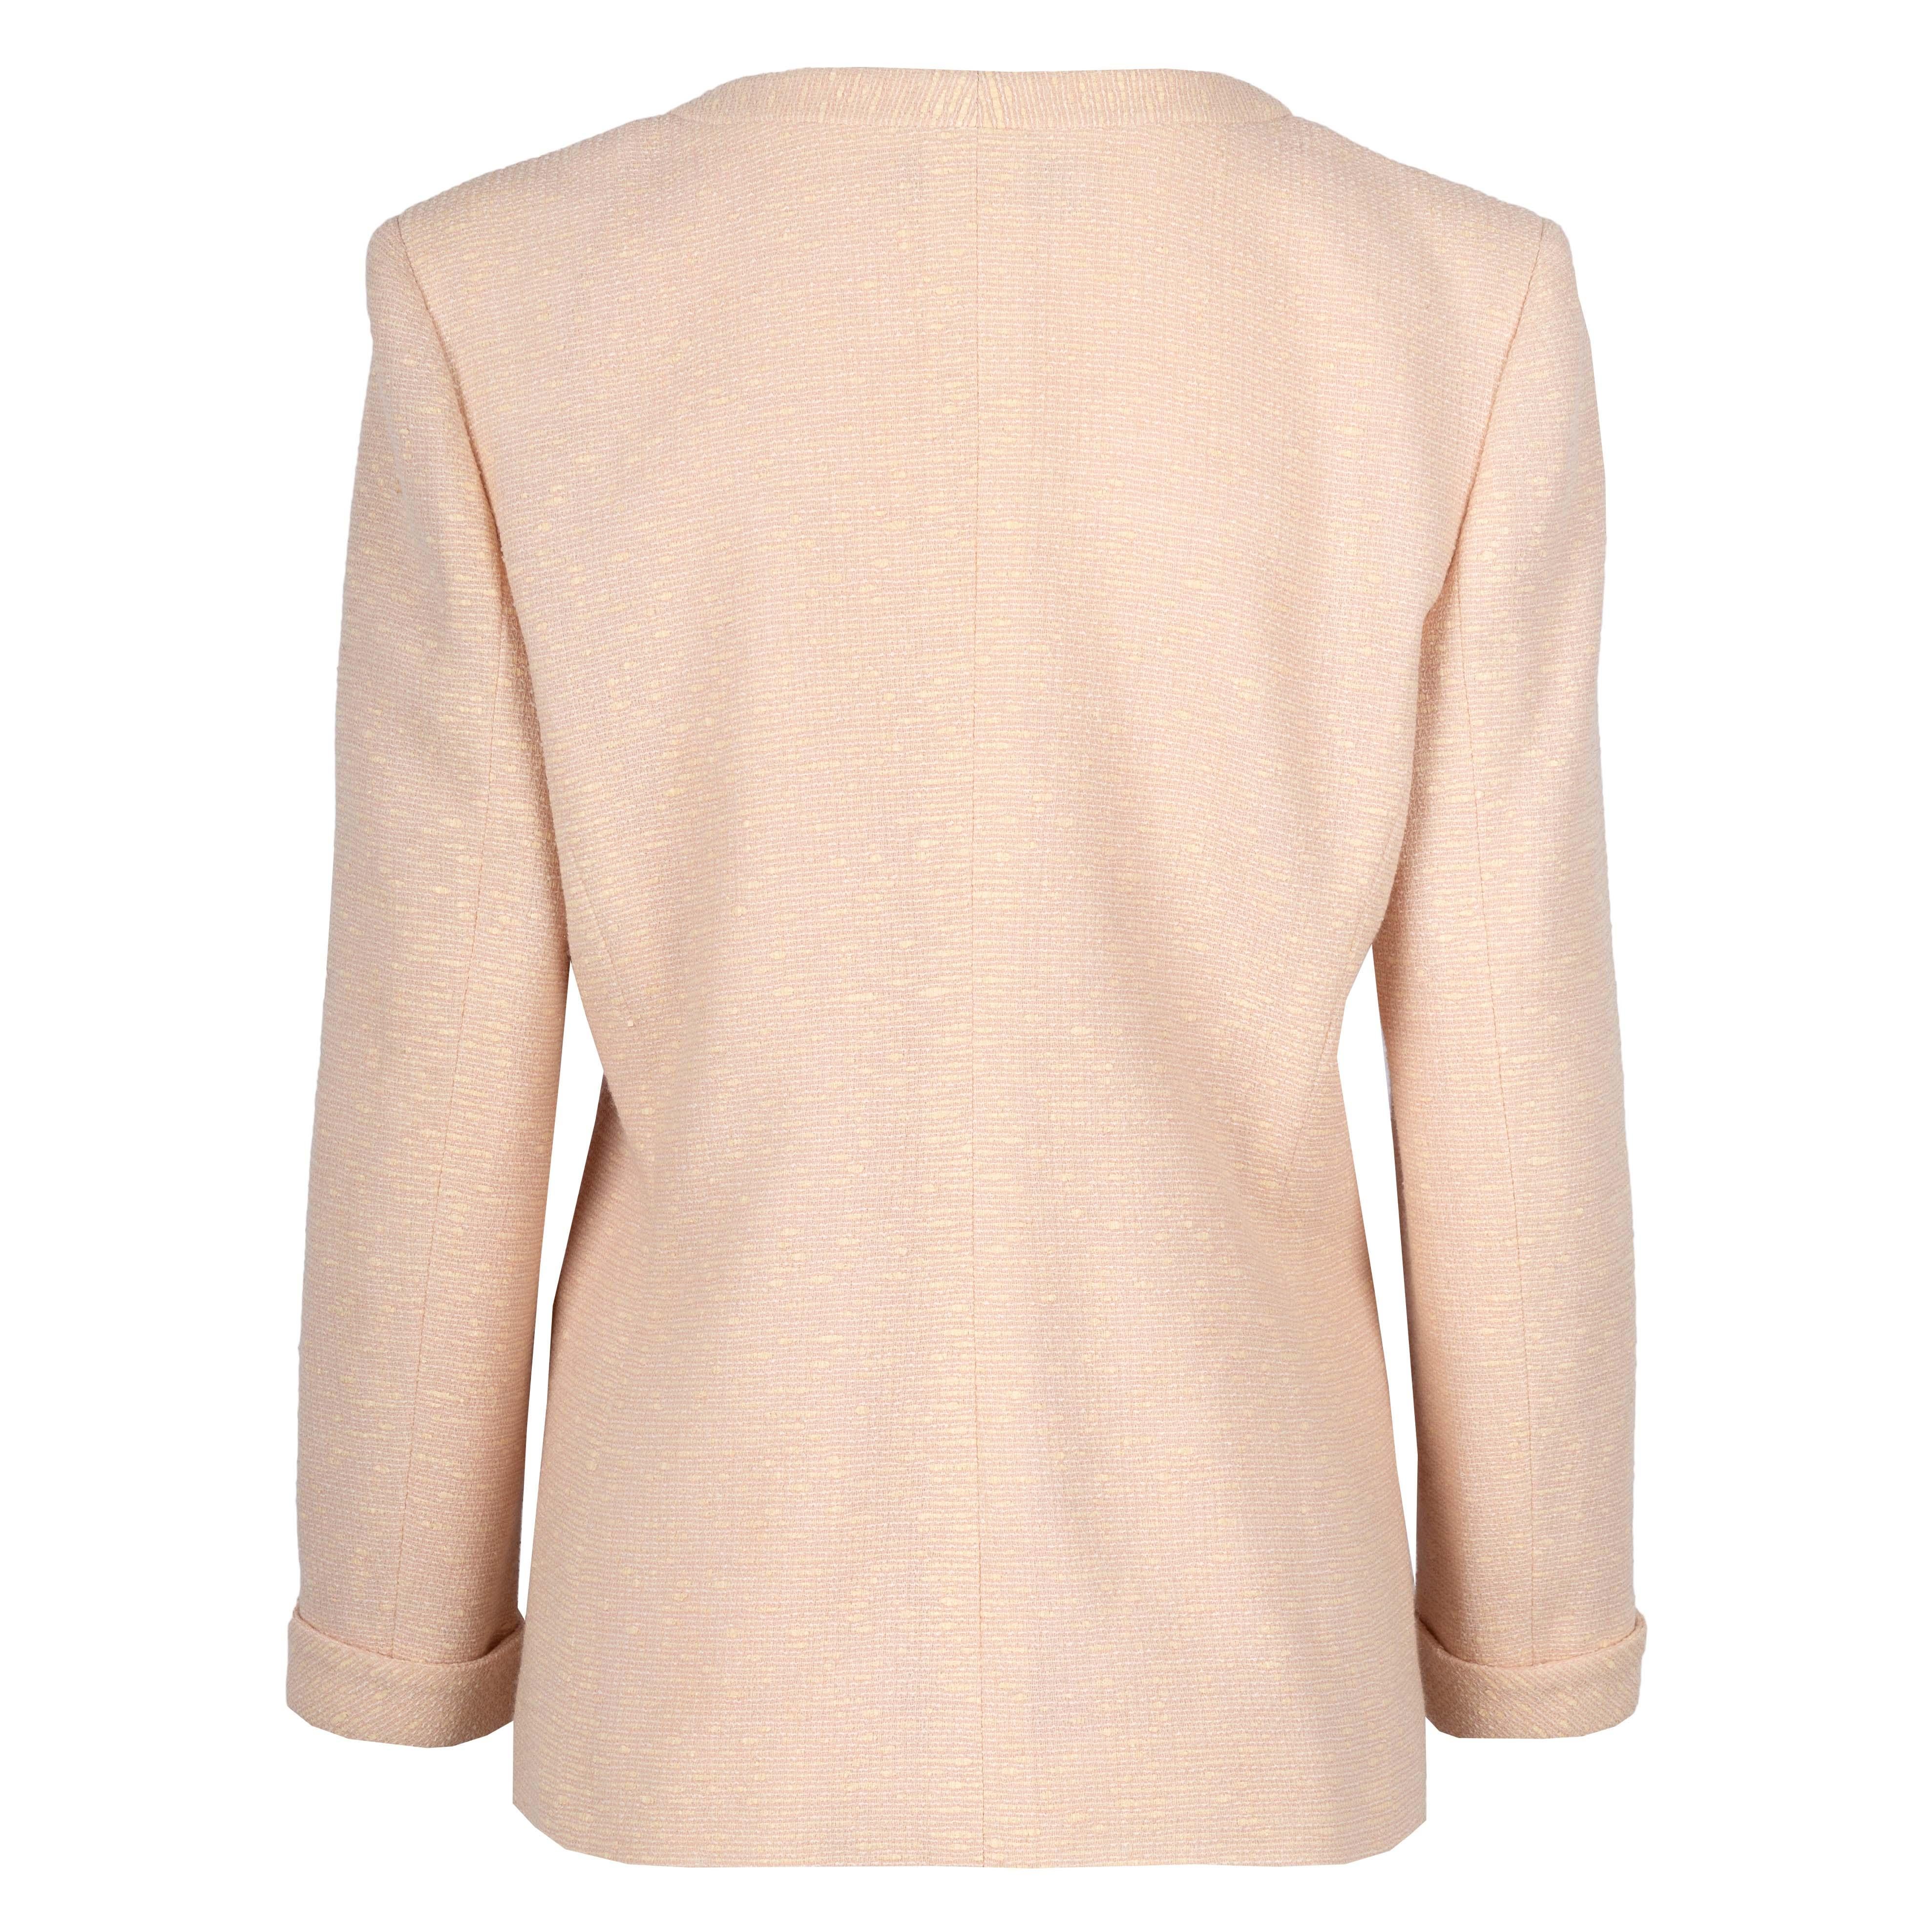 The Valentino pale pink jacket is a wool-cotton blend that features a round-neck collar and turn-up sleeves. The three pockets on the front help in safely securing small essentials. Please note that the buttons of this jacket need to be mended.